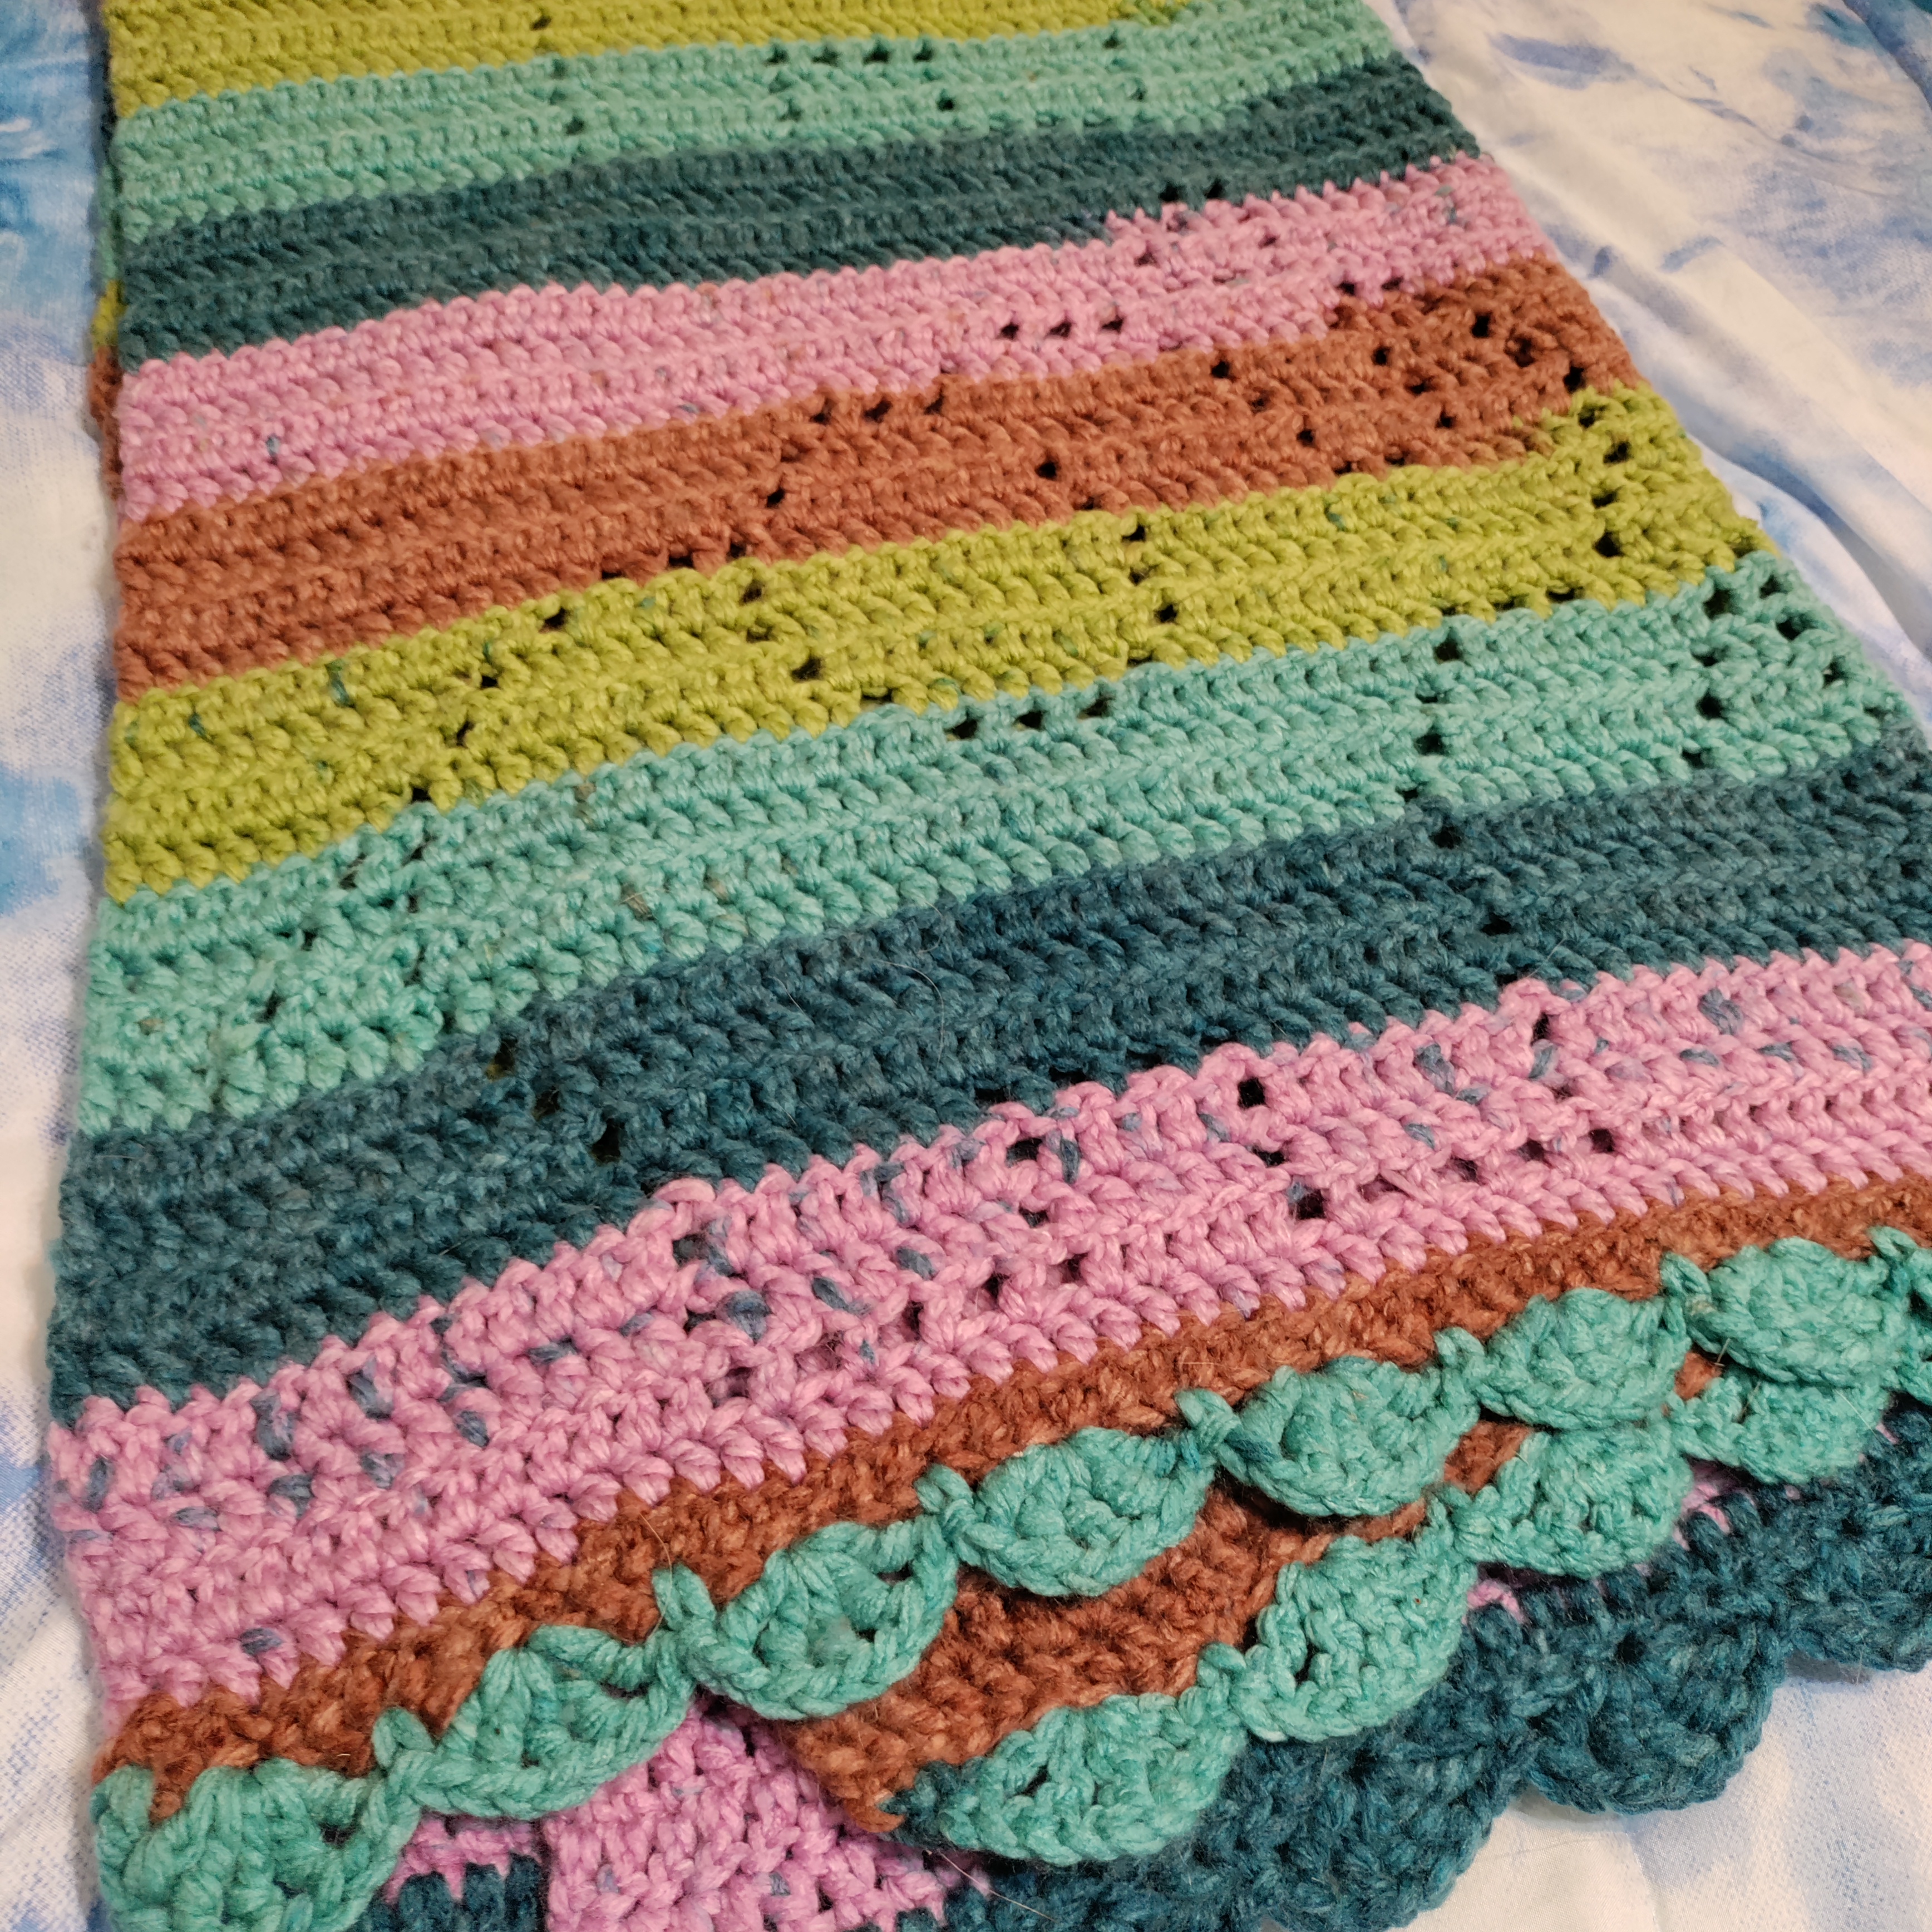 a more close up picture of a crocheted blanket with light and dark teals, olive green, brown, and pink stripes that has open stitches shaped like cute elephants with their trunks lifted and hearts above them, folded and zoomed into one of the elephants